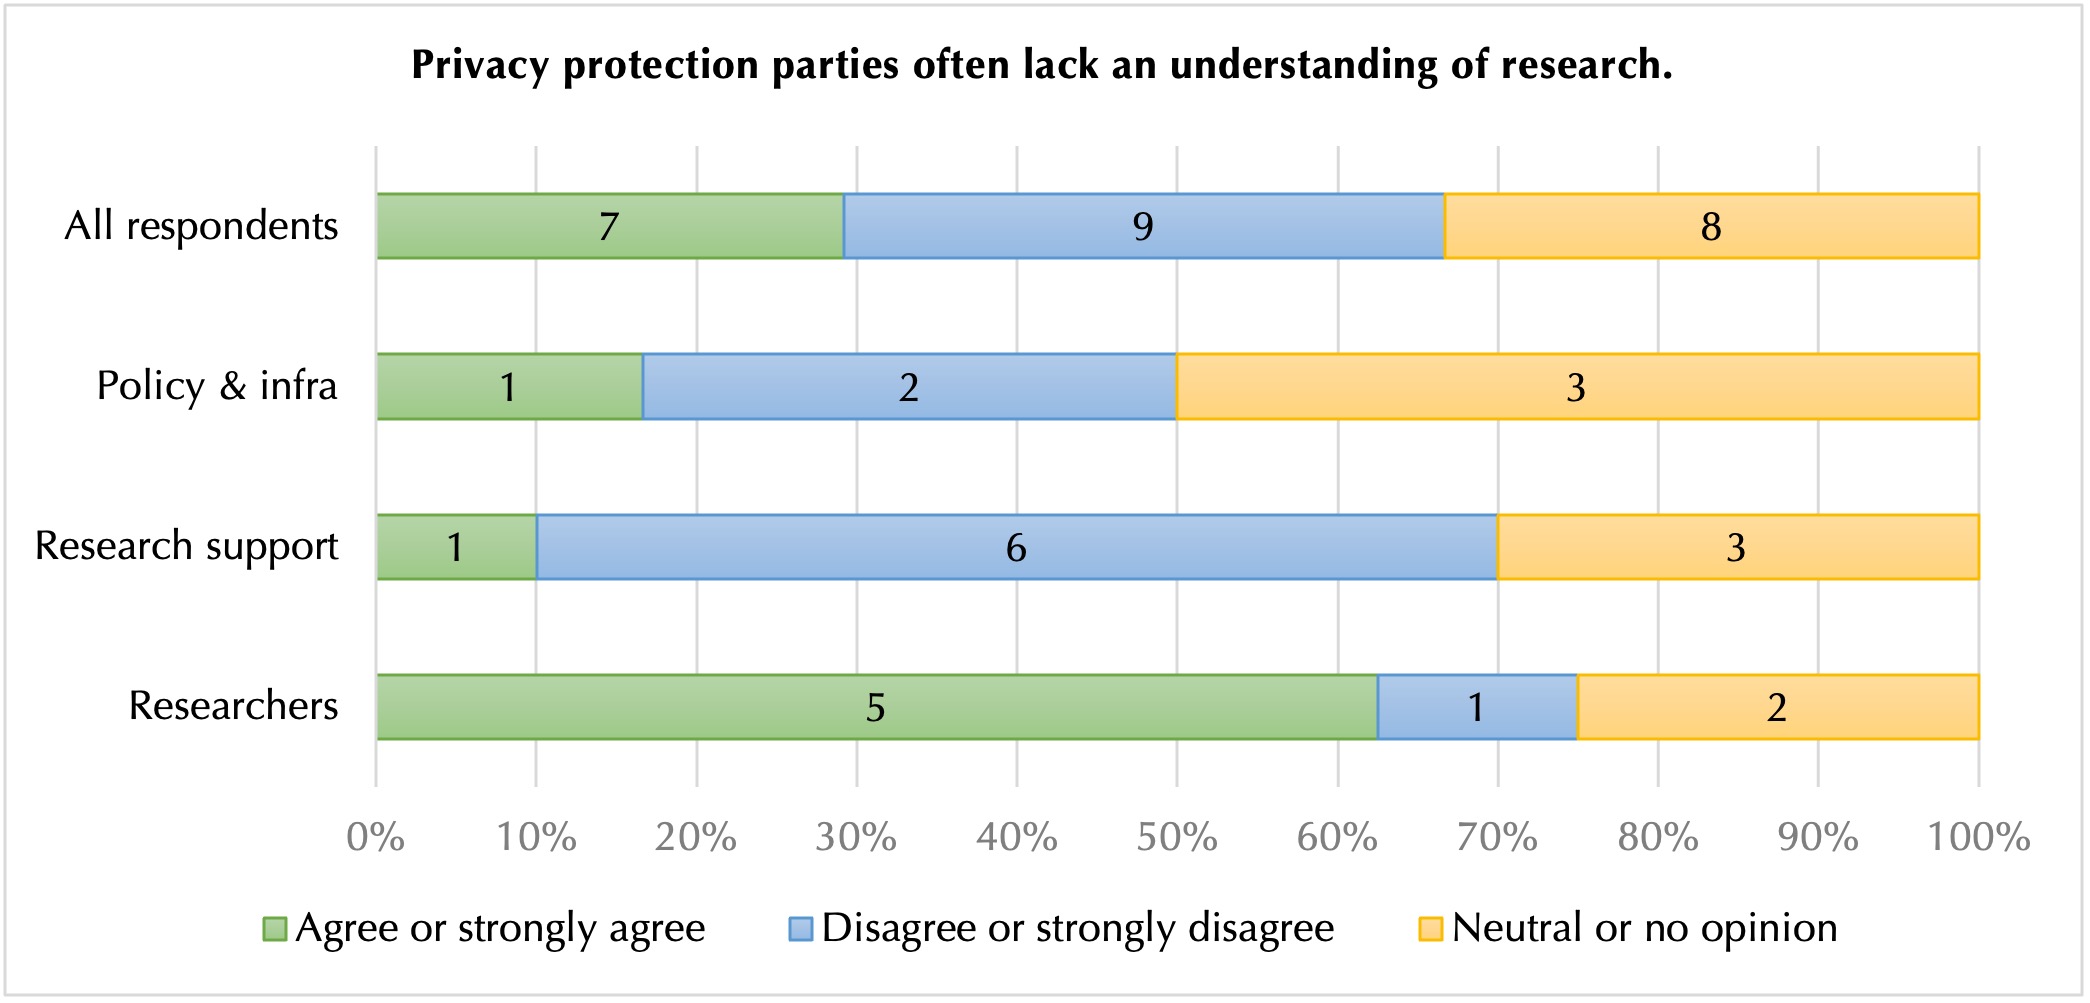 Figure 5: Participants’ views on privacy protection parties